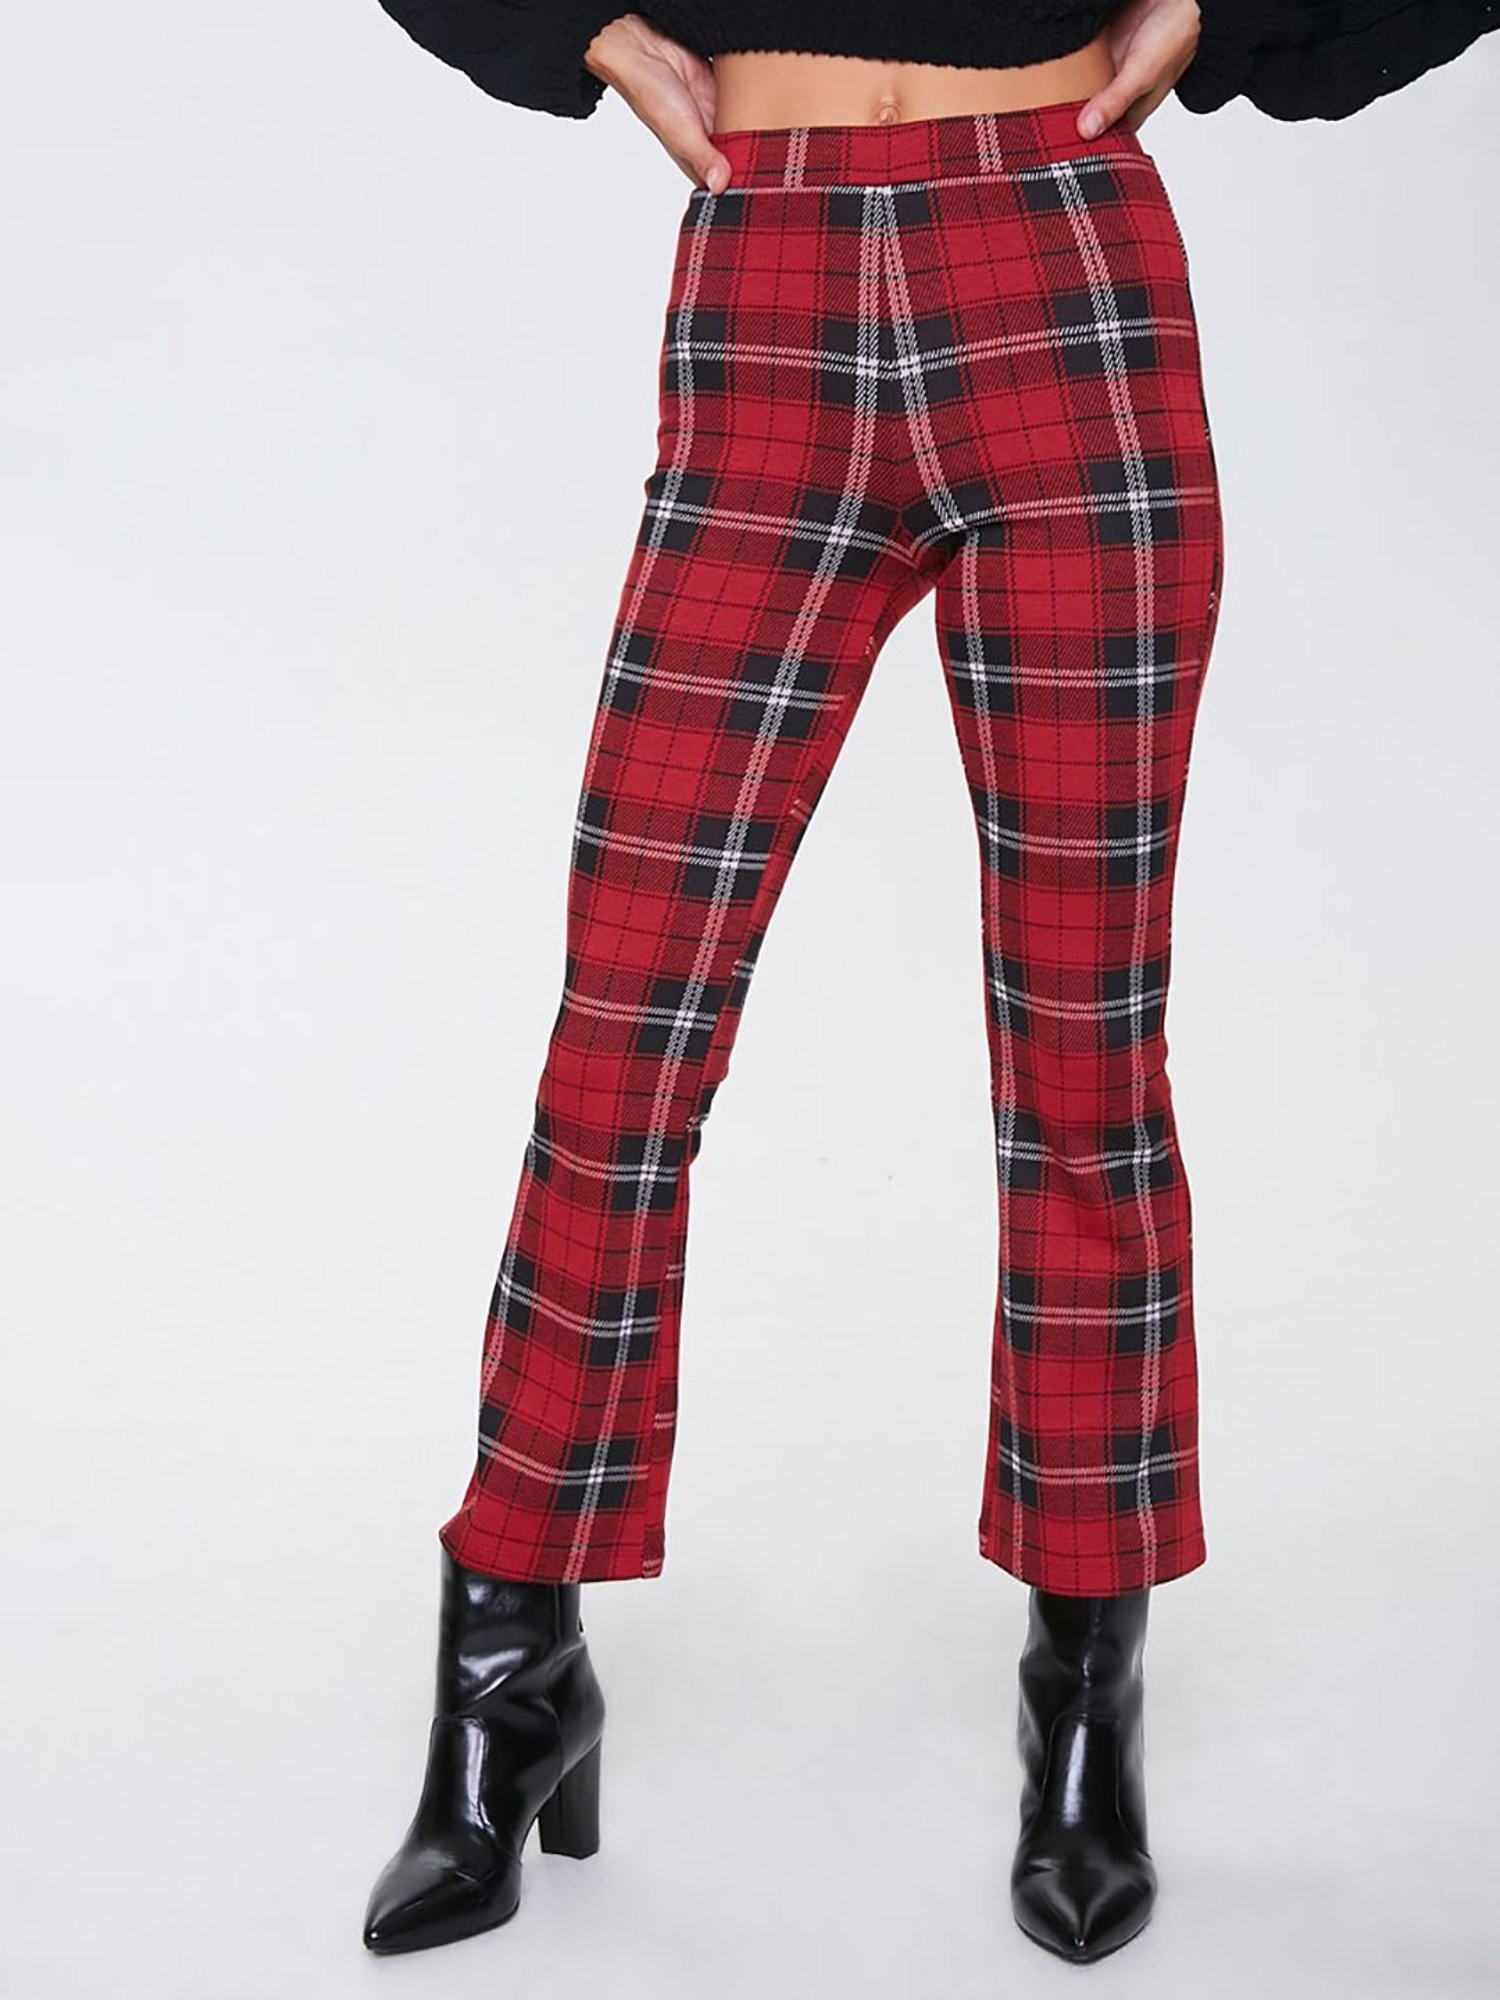 Buy Red White Check Regular Fit Solid Trouser Cotton for Best Price  Reviews Free Shipping